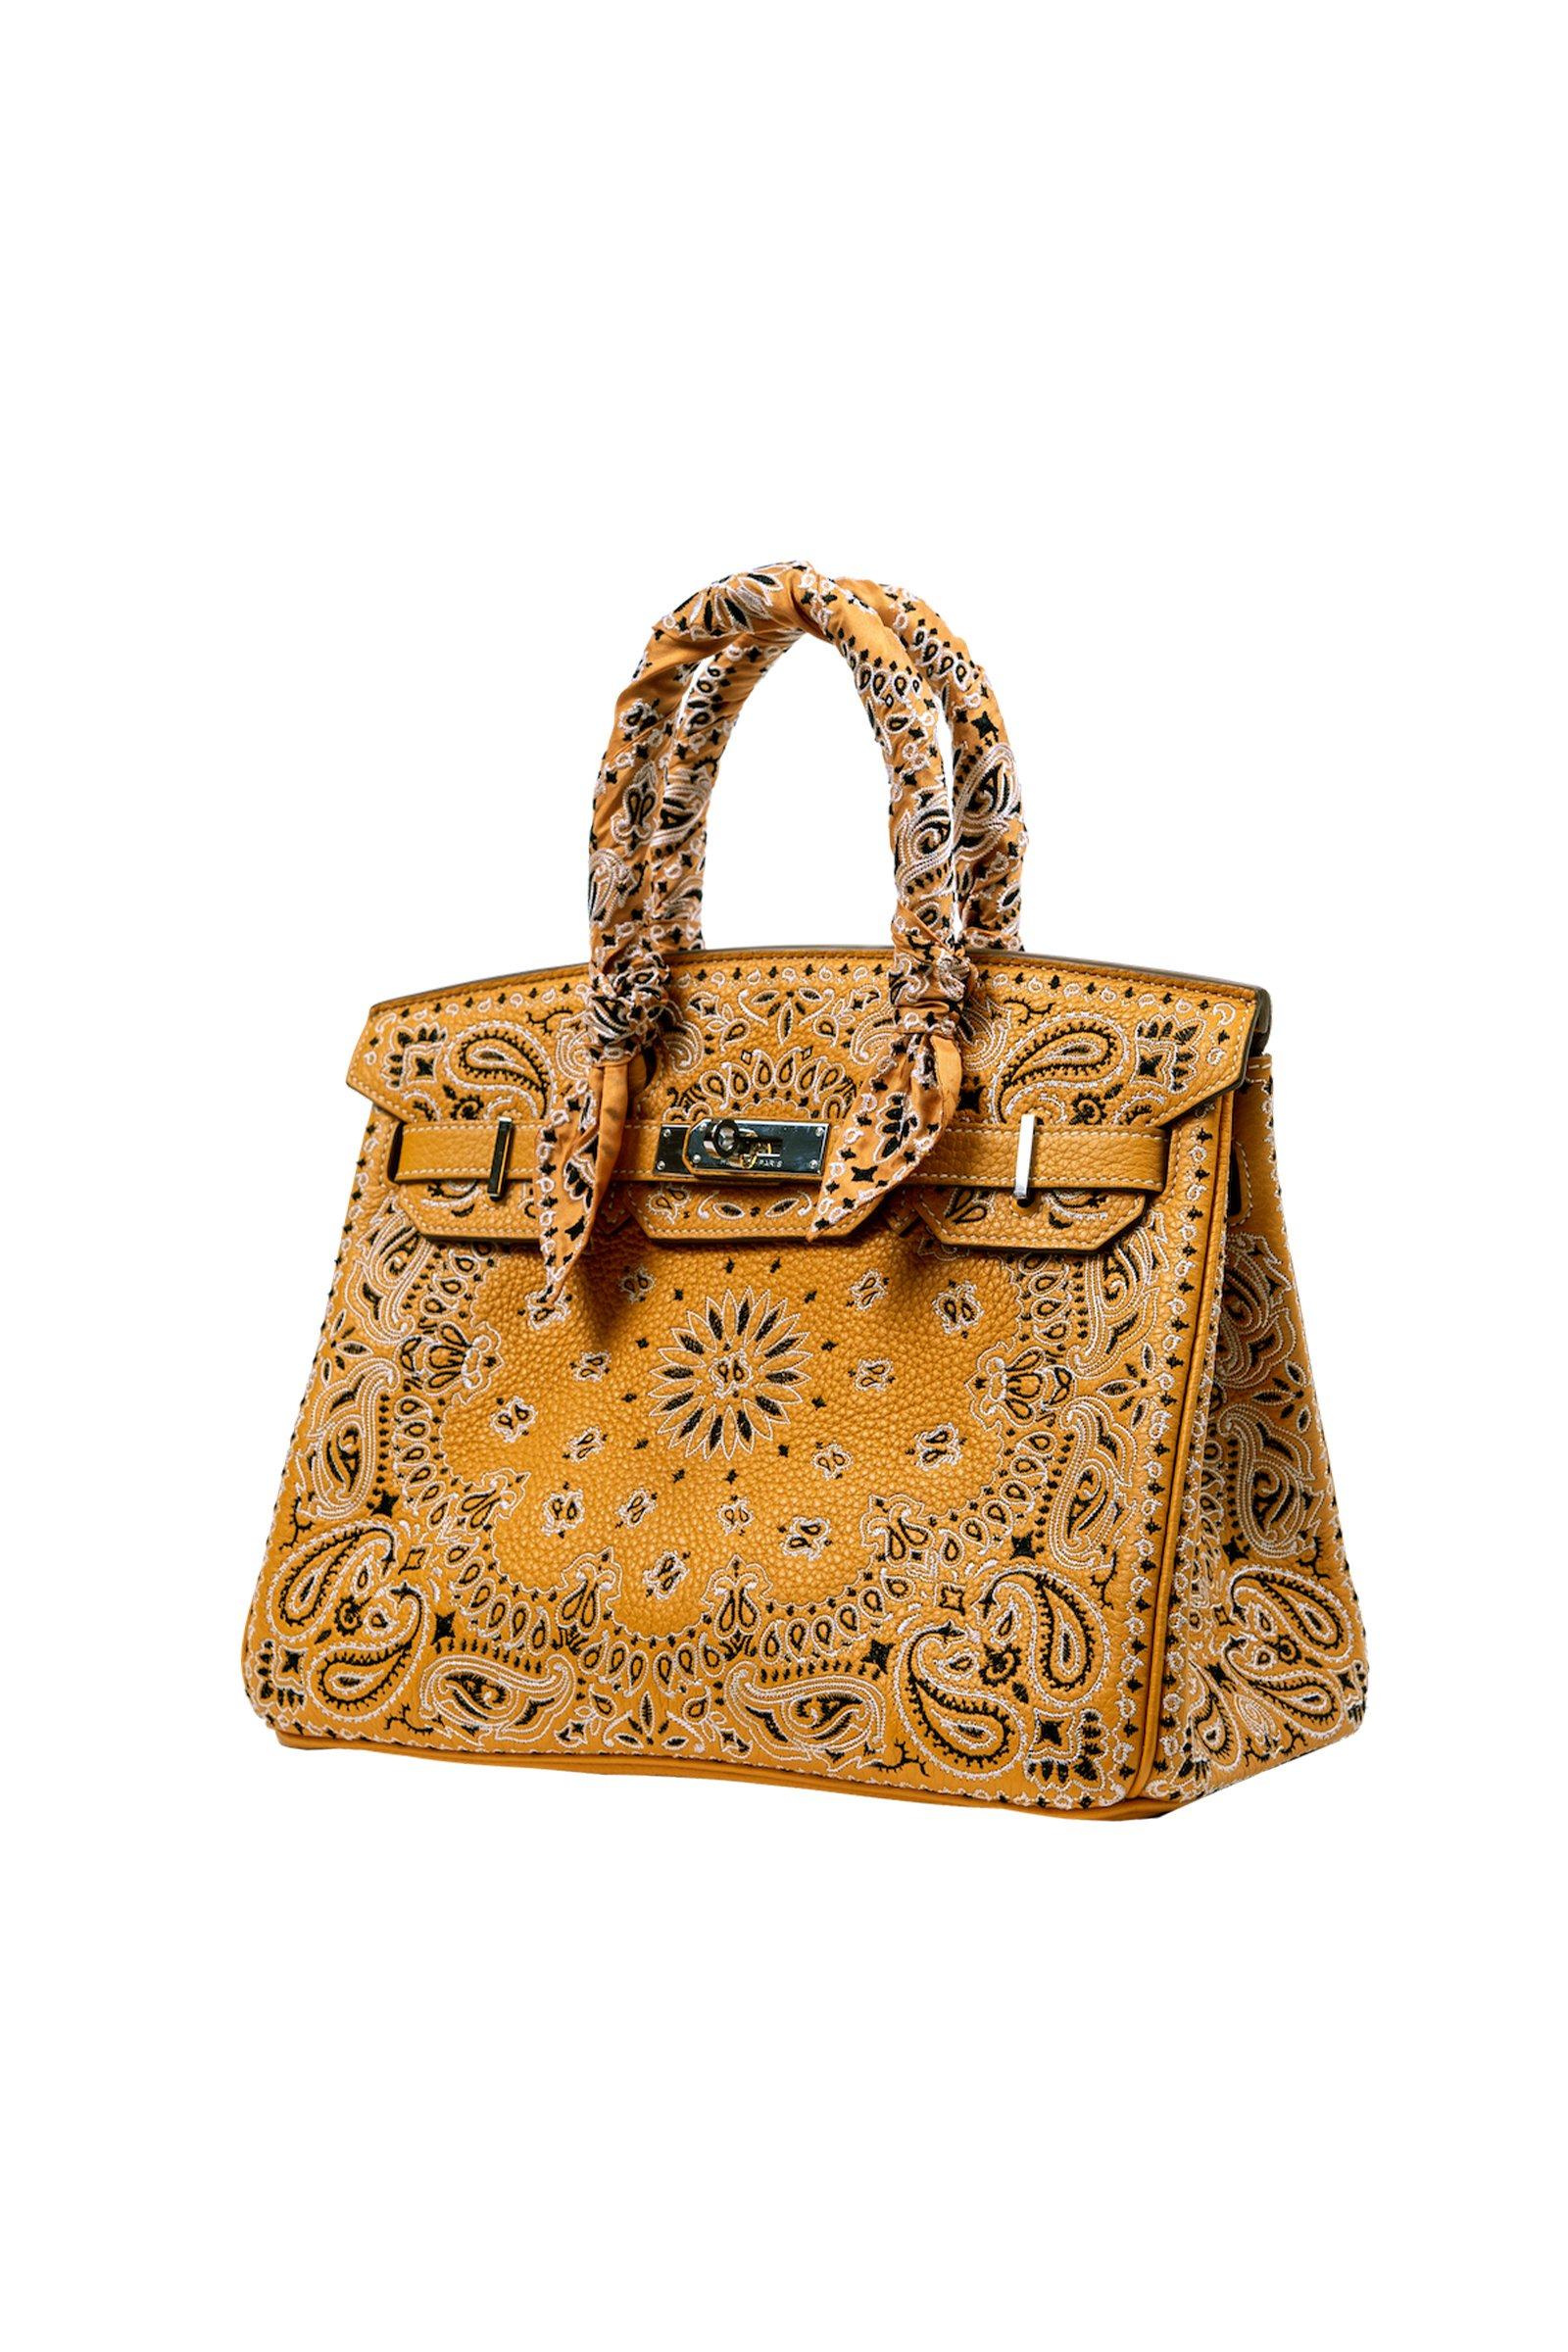 One&Only launches limited edition vintage Louis Vuitton Keepalls by Jay Ahr  - The Glass Magazine